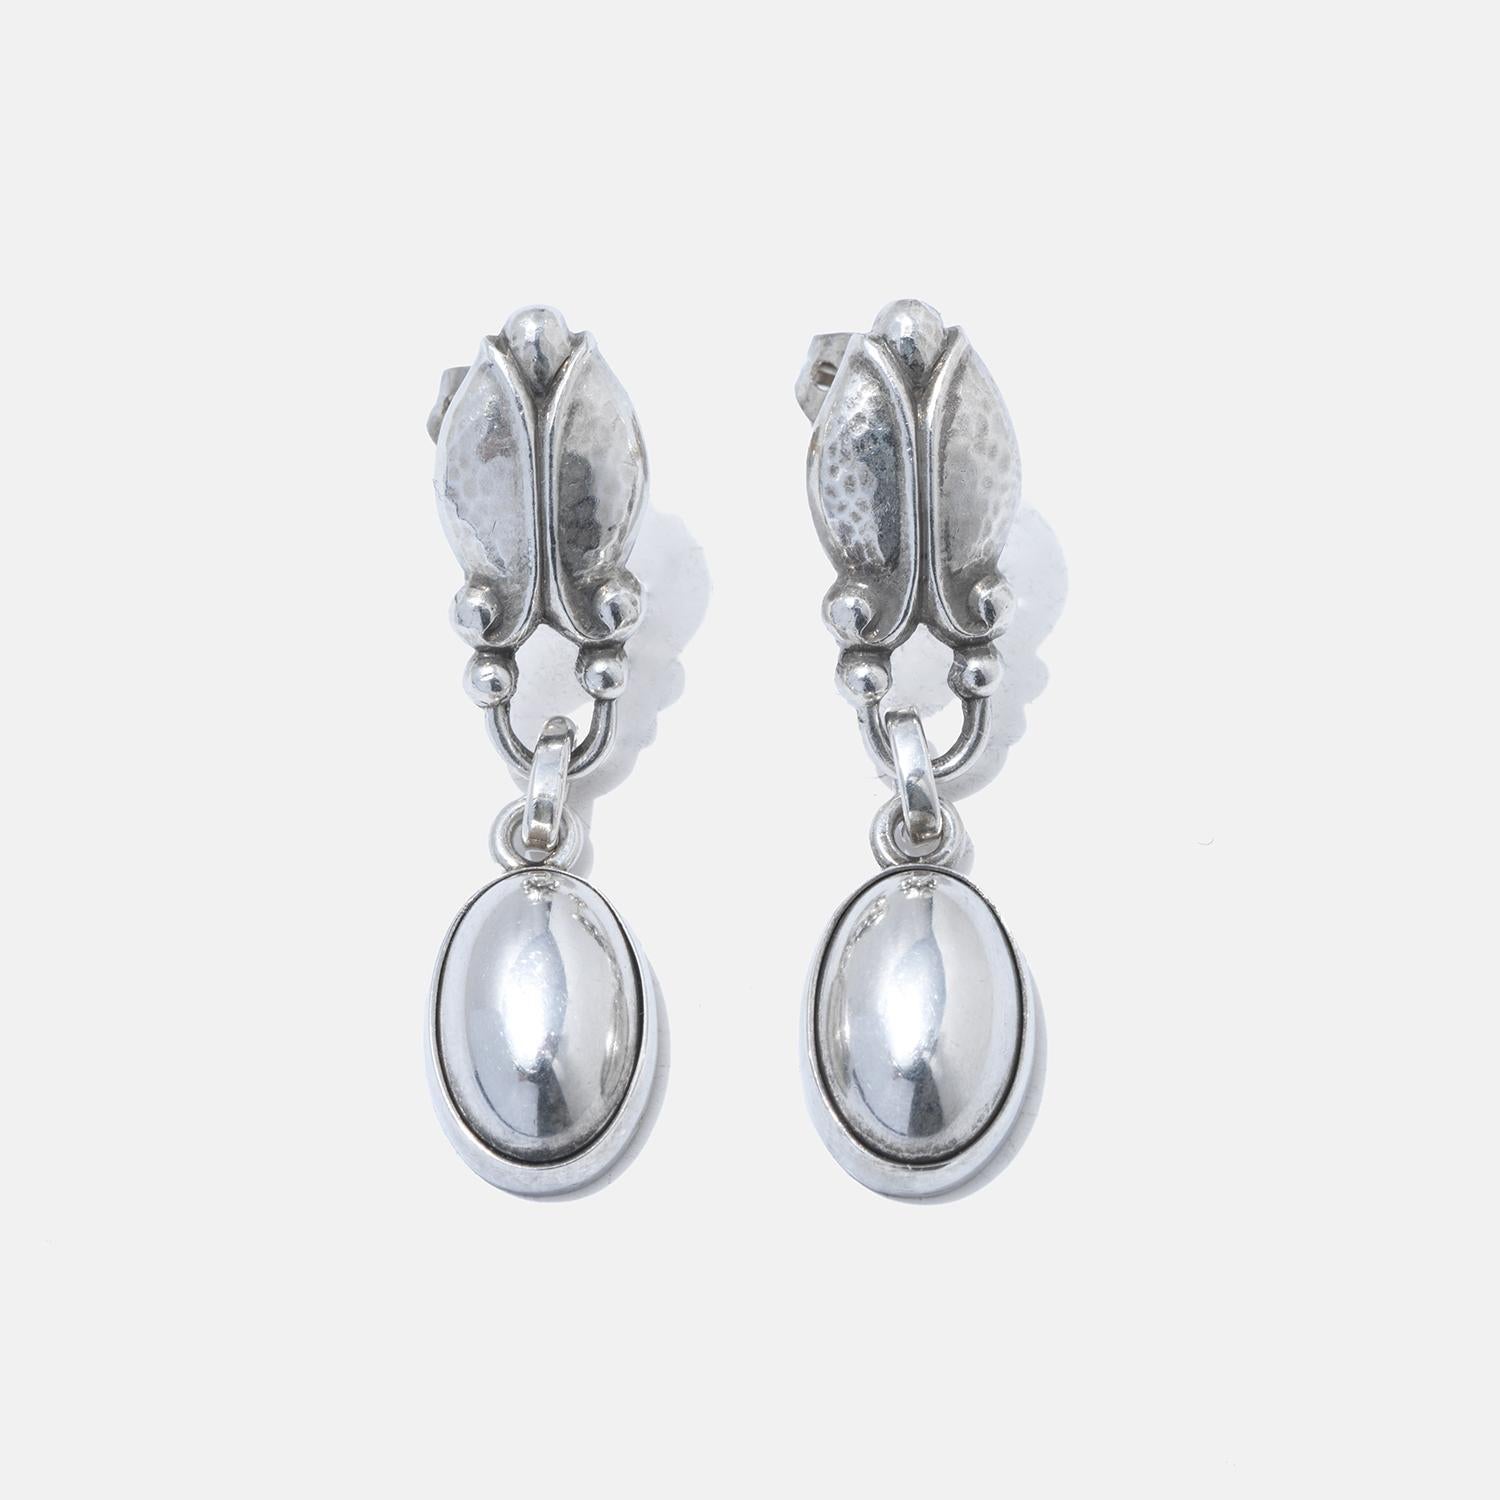 These sterling silver earrings showcase a delicate leaf pattern at the top with a hammered finish that provides texture and visual interest. Attached to the leaf motif by a small, articulated joint is a smooth, polished oval drop that sways gently,